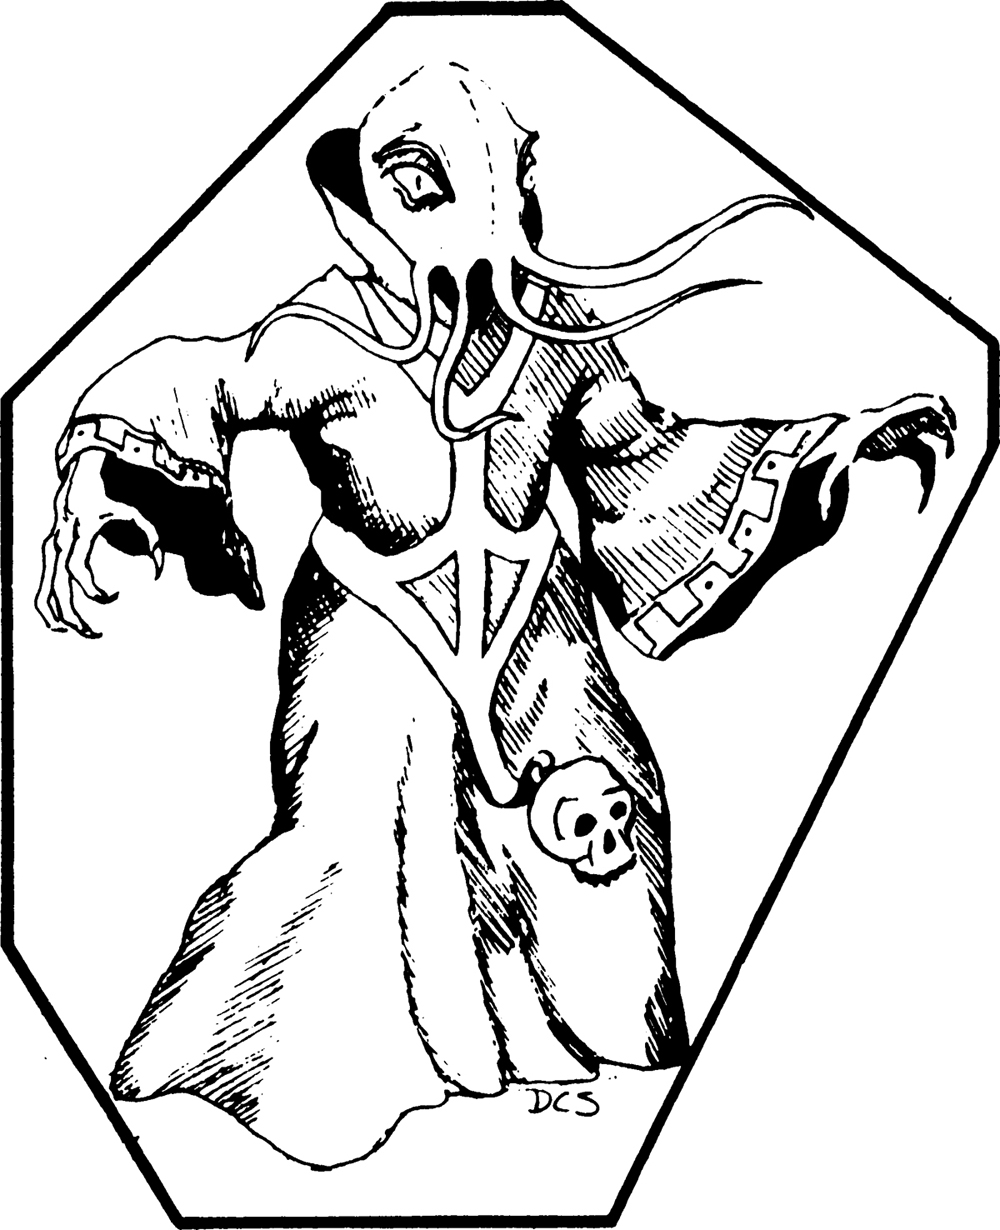 A black and white ink drawing captures a mindflayer from Dungeons & Dragons. Enclosed within a hexagonal border, the creature is depicted with its distinctive octopus-like head and tentacles that hang around where a human's mouth would be. Its eyes are simple and dark, adding to its mysterious visage. The mindflayer wears a flowing robe adorned with patterns and a medallion featuring a skull at the center of its chest, suggesting a high rank or status. One arm is bent at the elbow and raised slightly, while the other is extended outward, both ending in clawed hands. The artist's initials, "DCS," are in the lower corner, indicating their signature on the work. The style is reminiscent of early fantasy illustrations with its bold lines and dramatic shading.